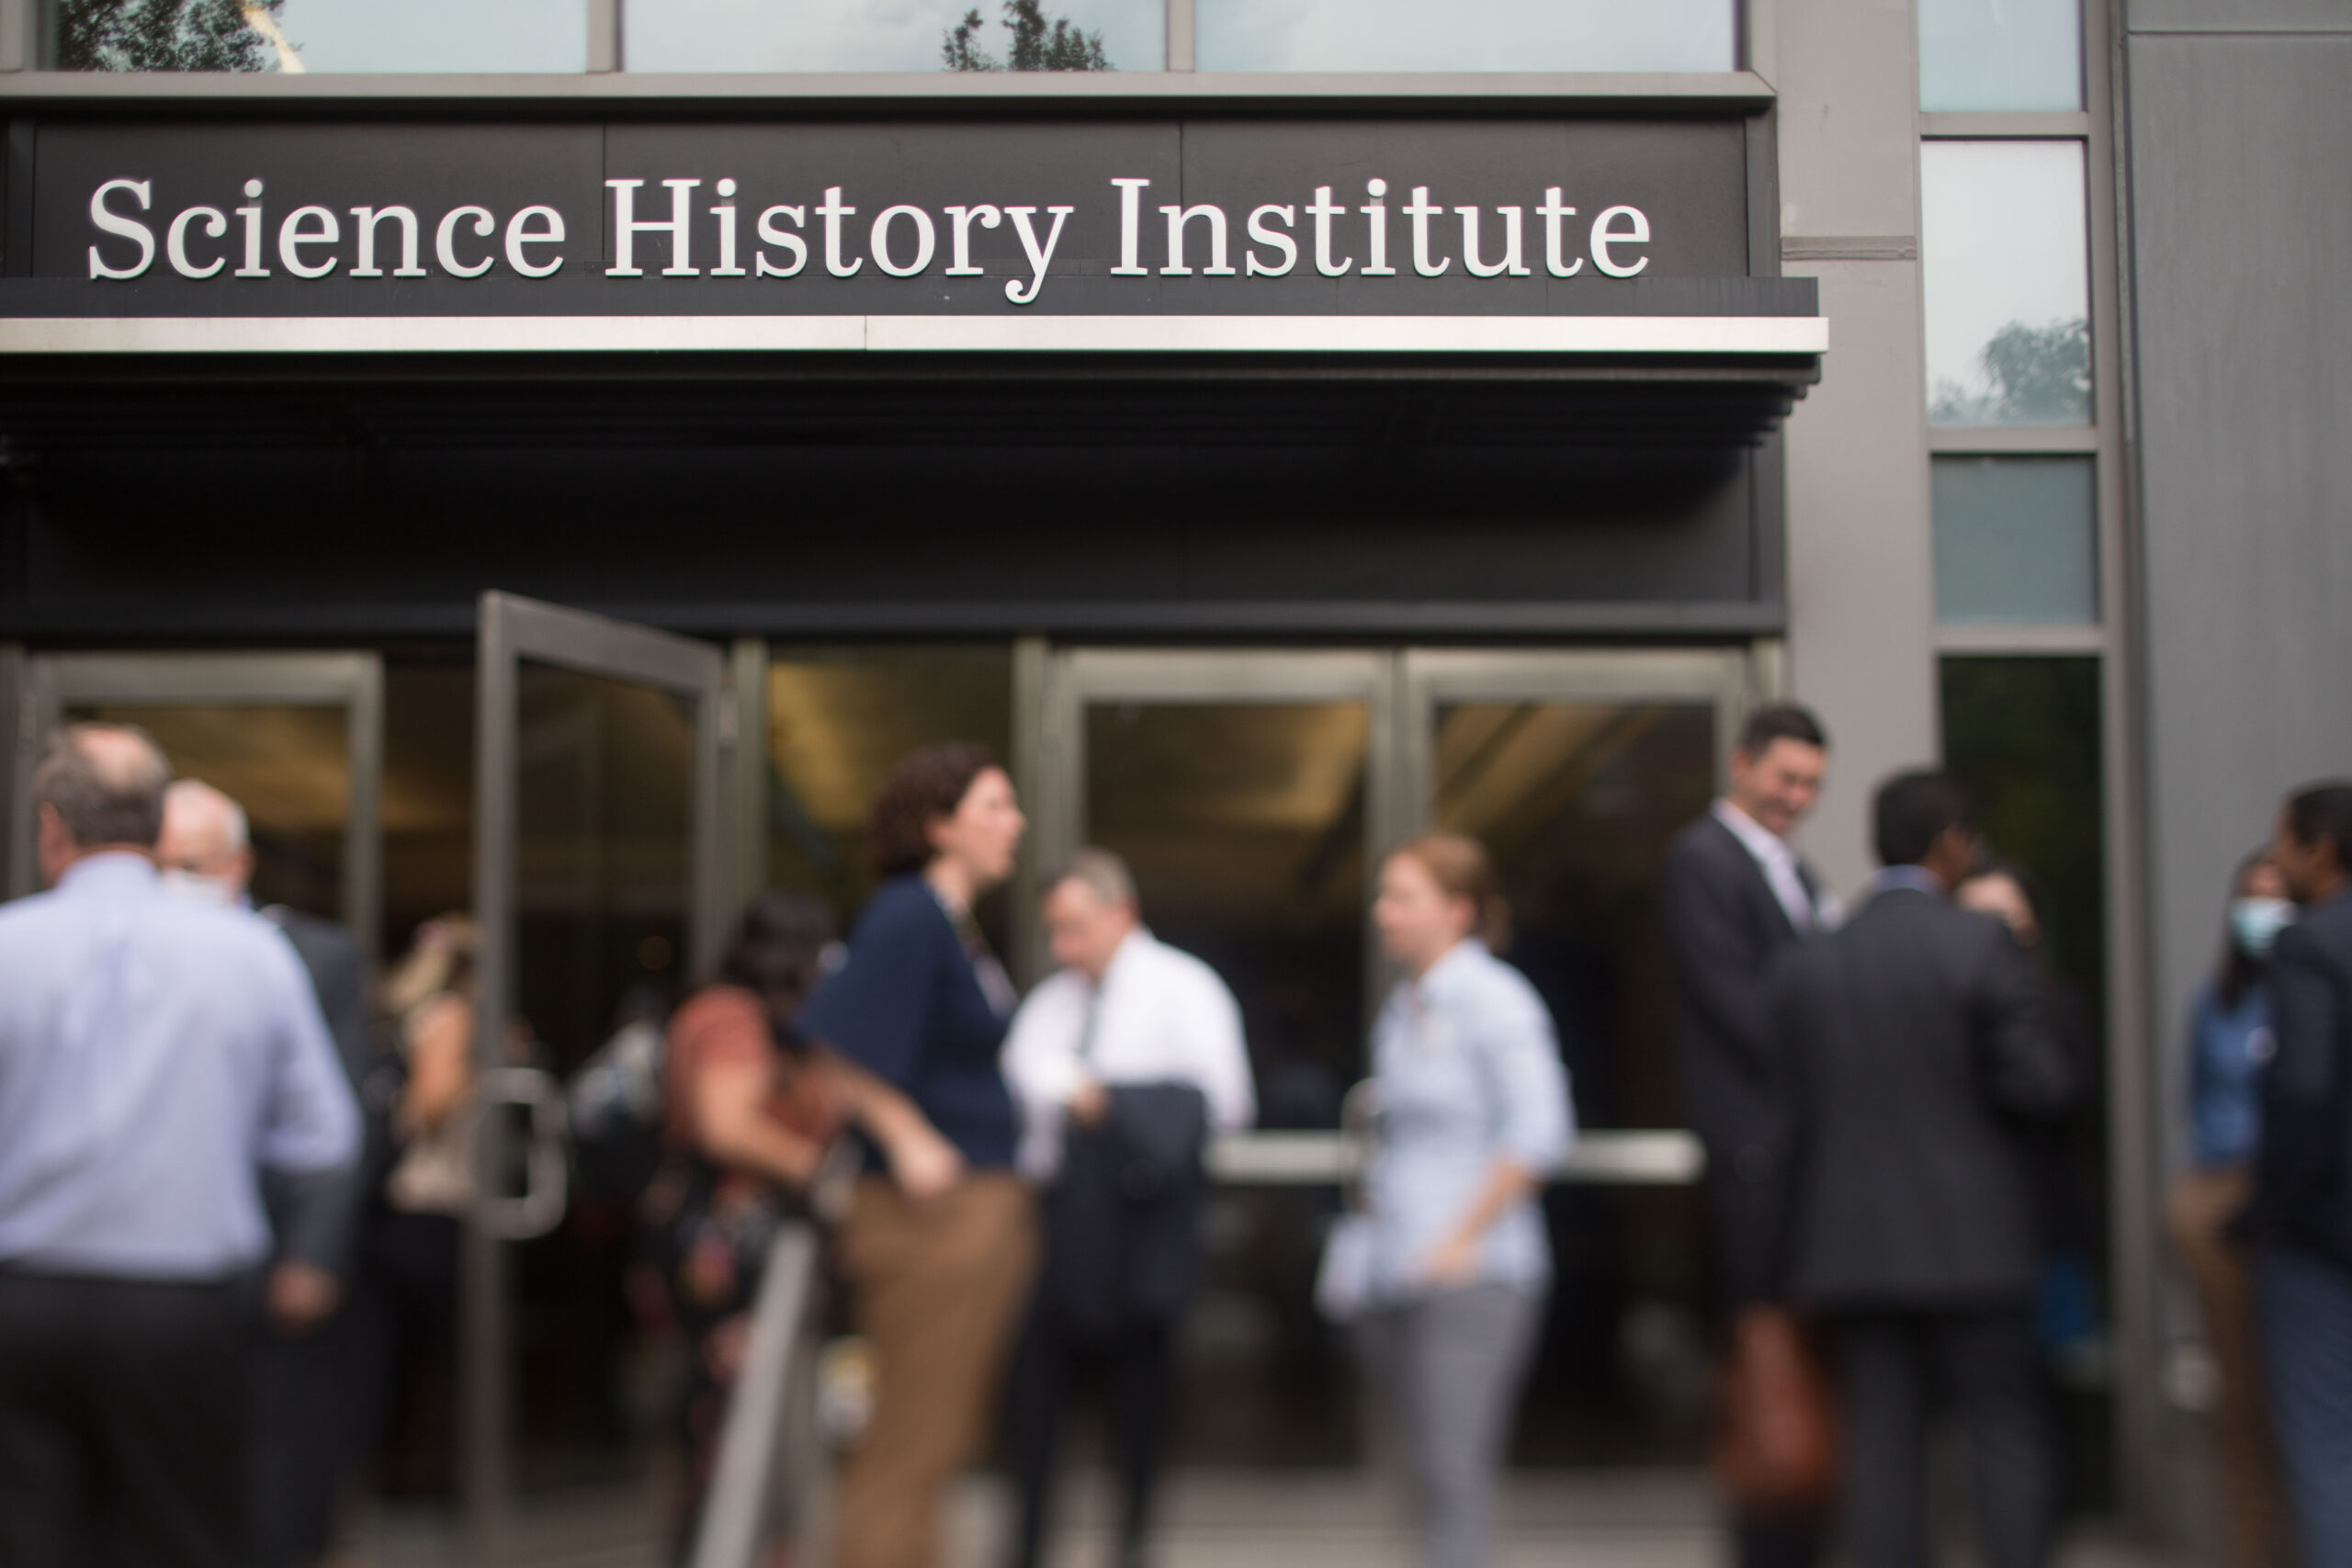 Science History Institute Chestnut Street Entrance with people